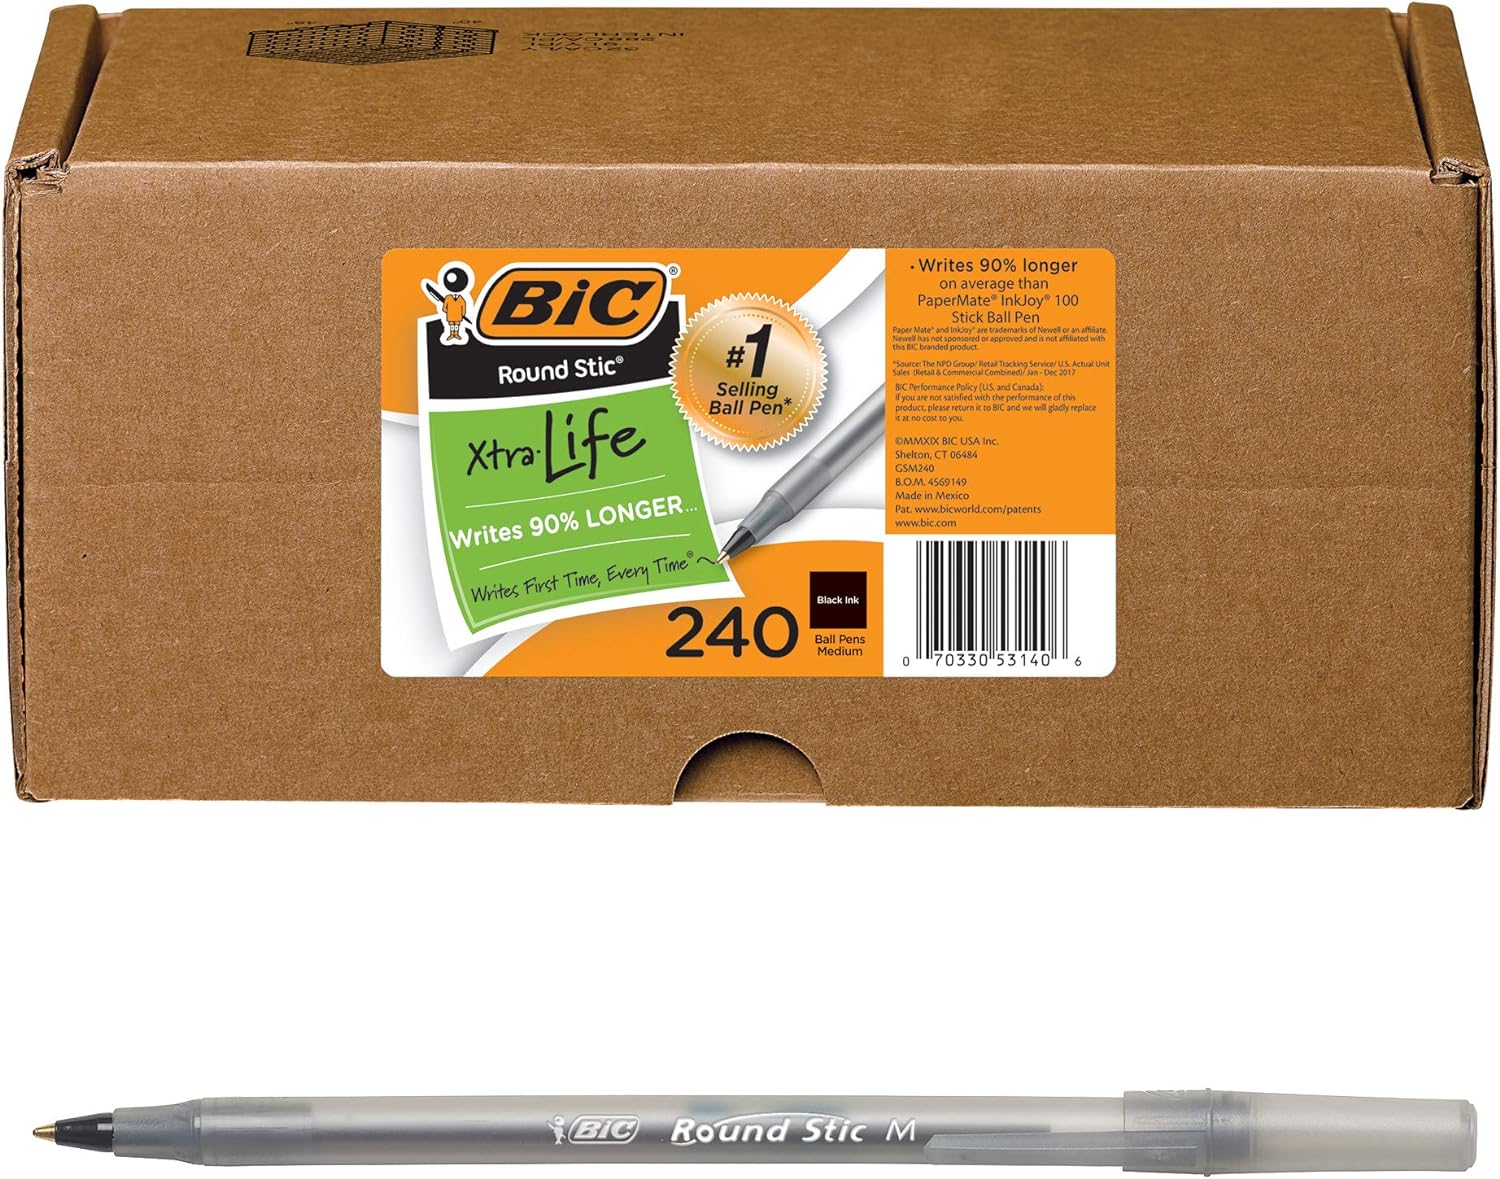 BIC Round Stic Xtra Life Ball Pen, Medium Point (1.0mm), Assorted Colors, 240-Count